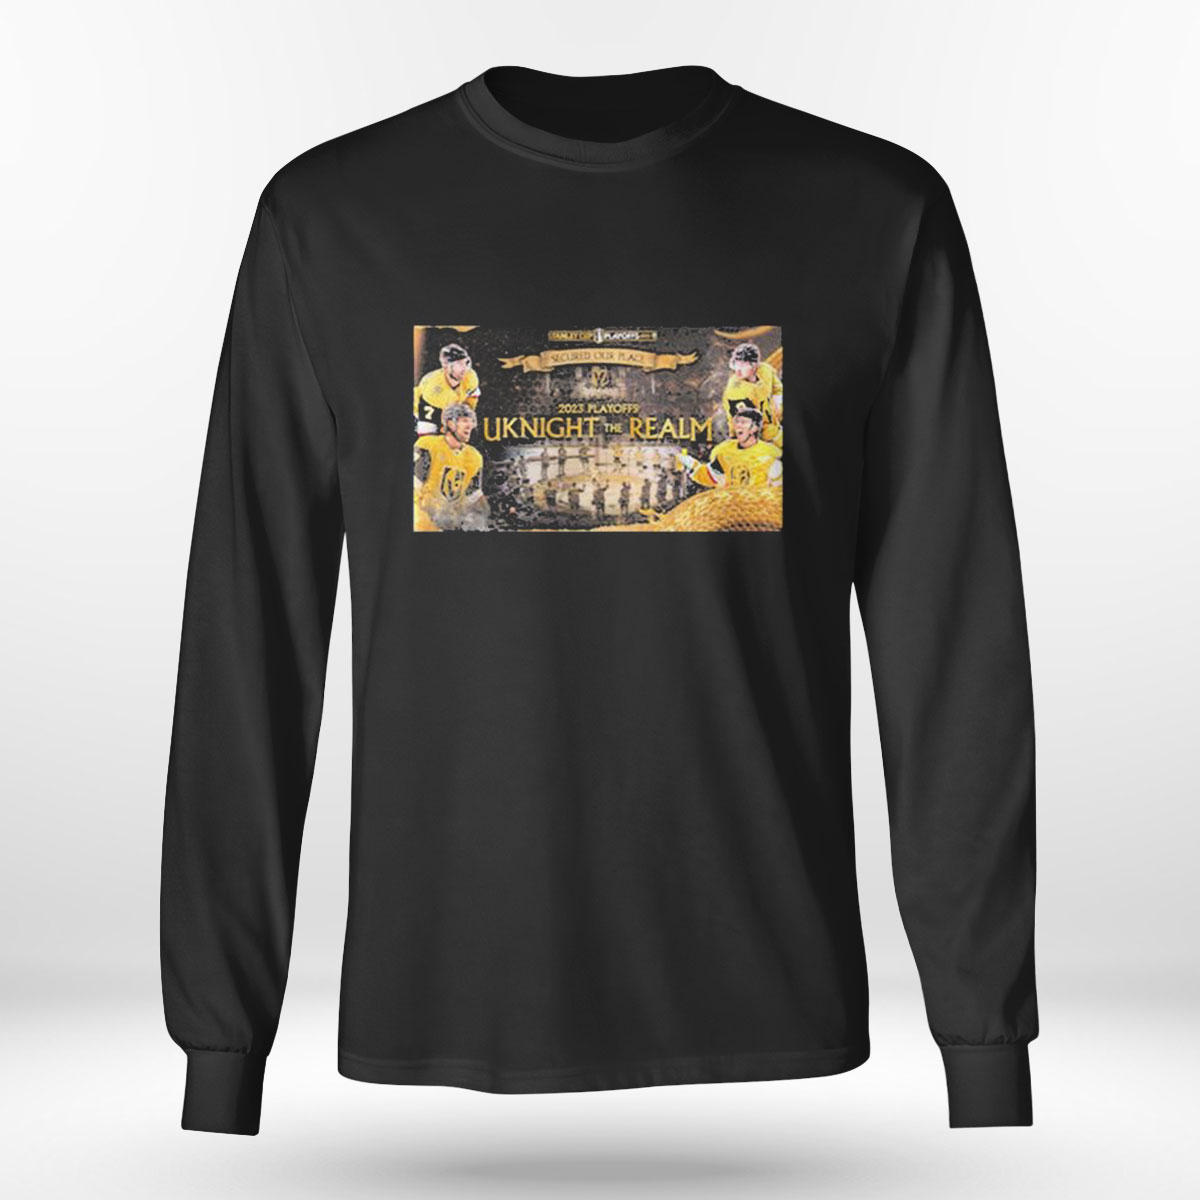 NHL Vegas Golden Knights Uknight the Realm white shirt, hoodie, sweater,  long sleeve and tank top